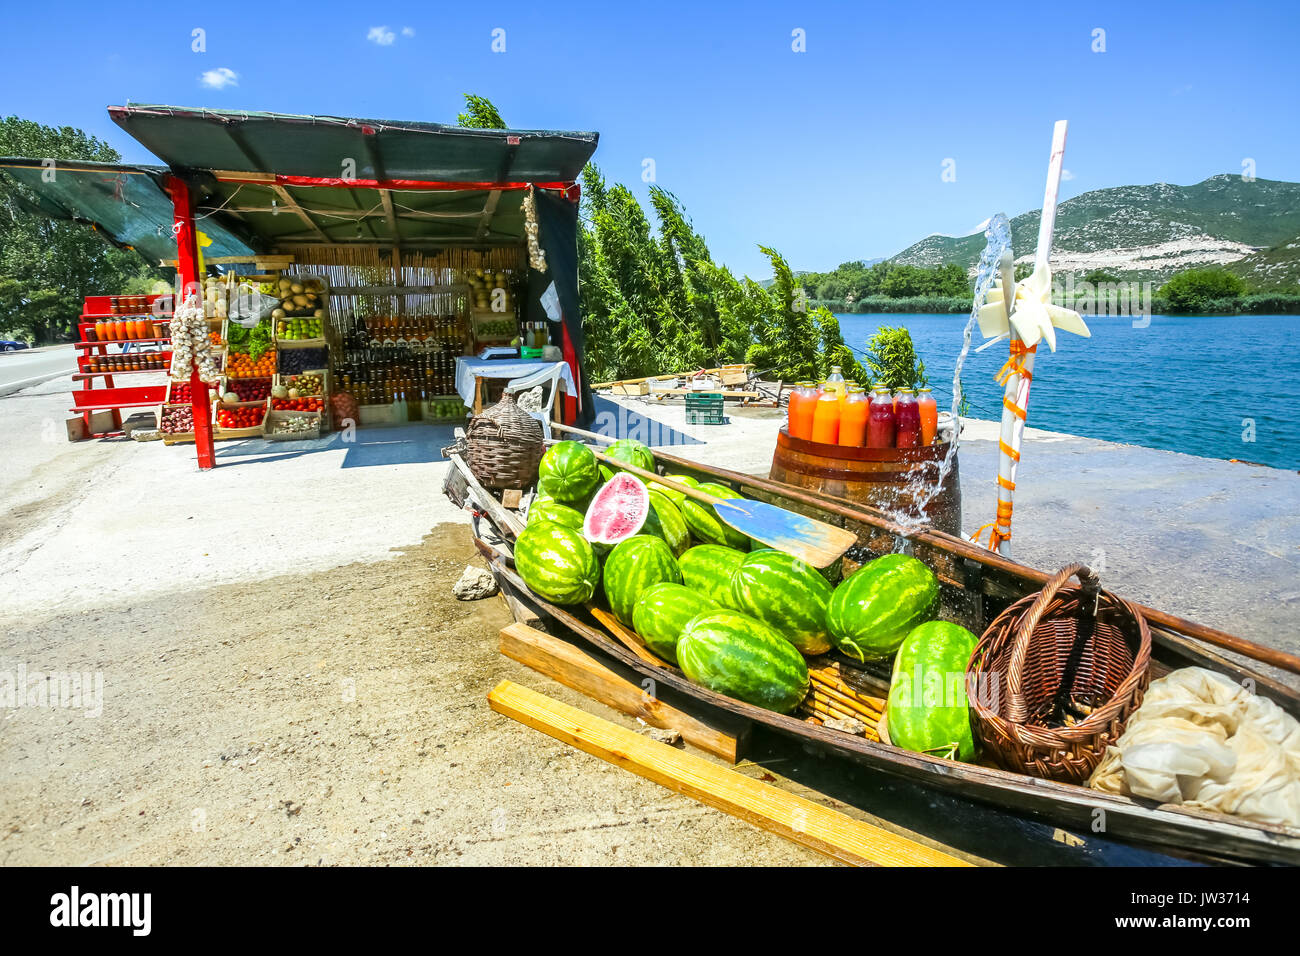 Watermelons in a boat and fresh homemade fruit juices on a barrel displayed at a food stand next to the river Neretva in Croatia. Stock Photo